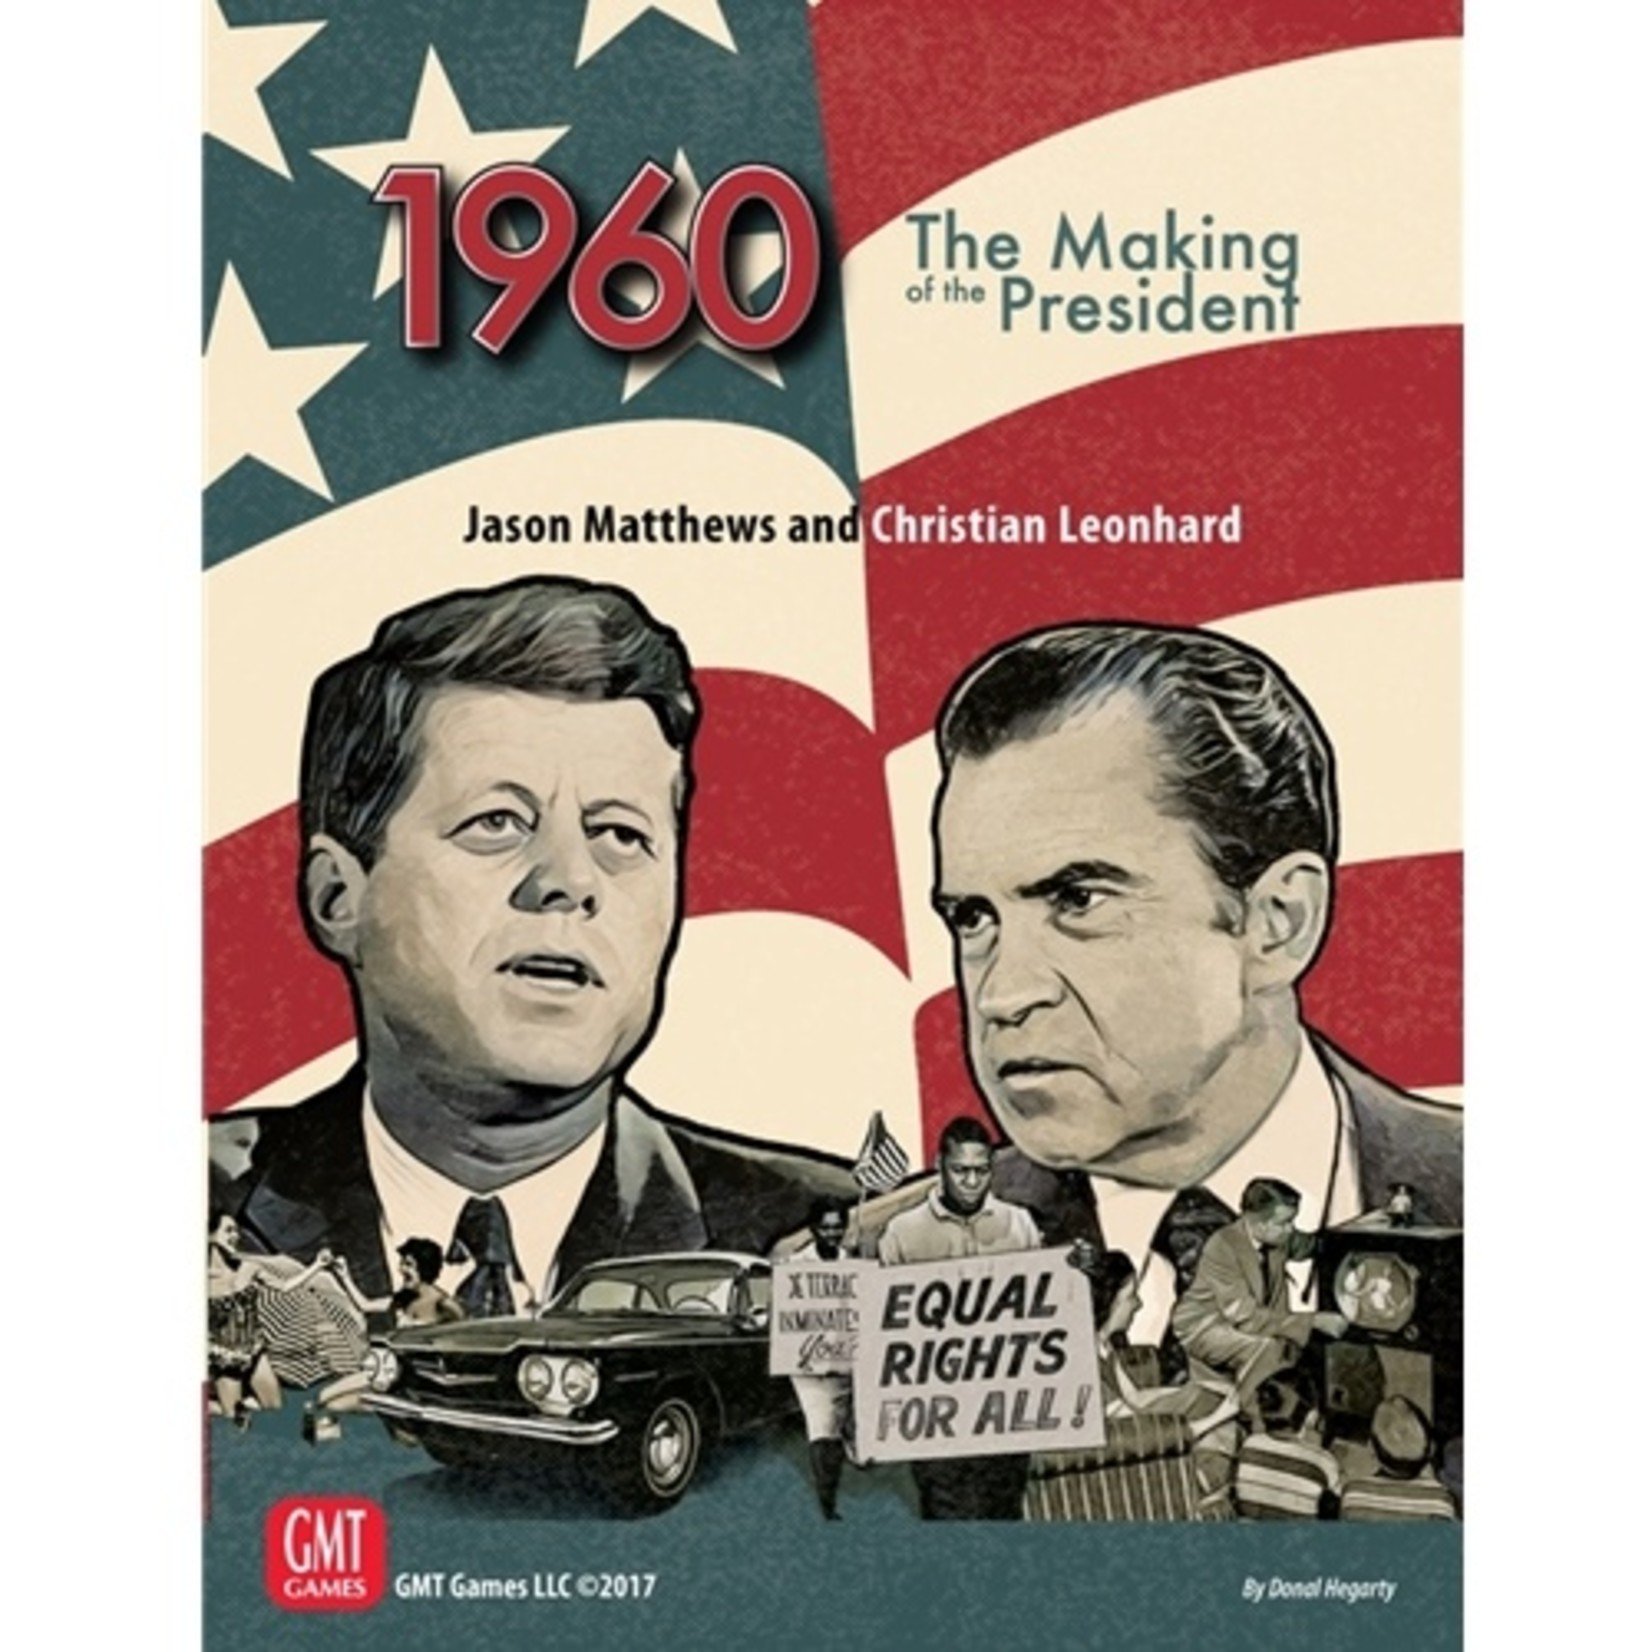 GMT Games 1960 The Making of the President